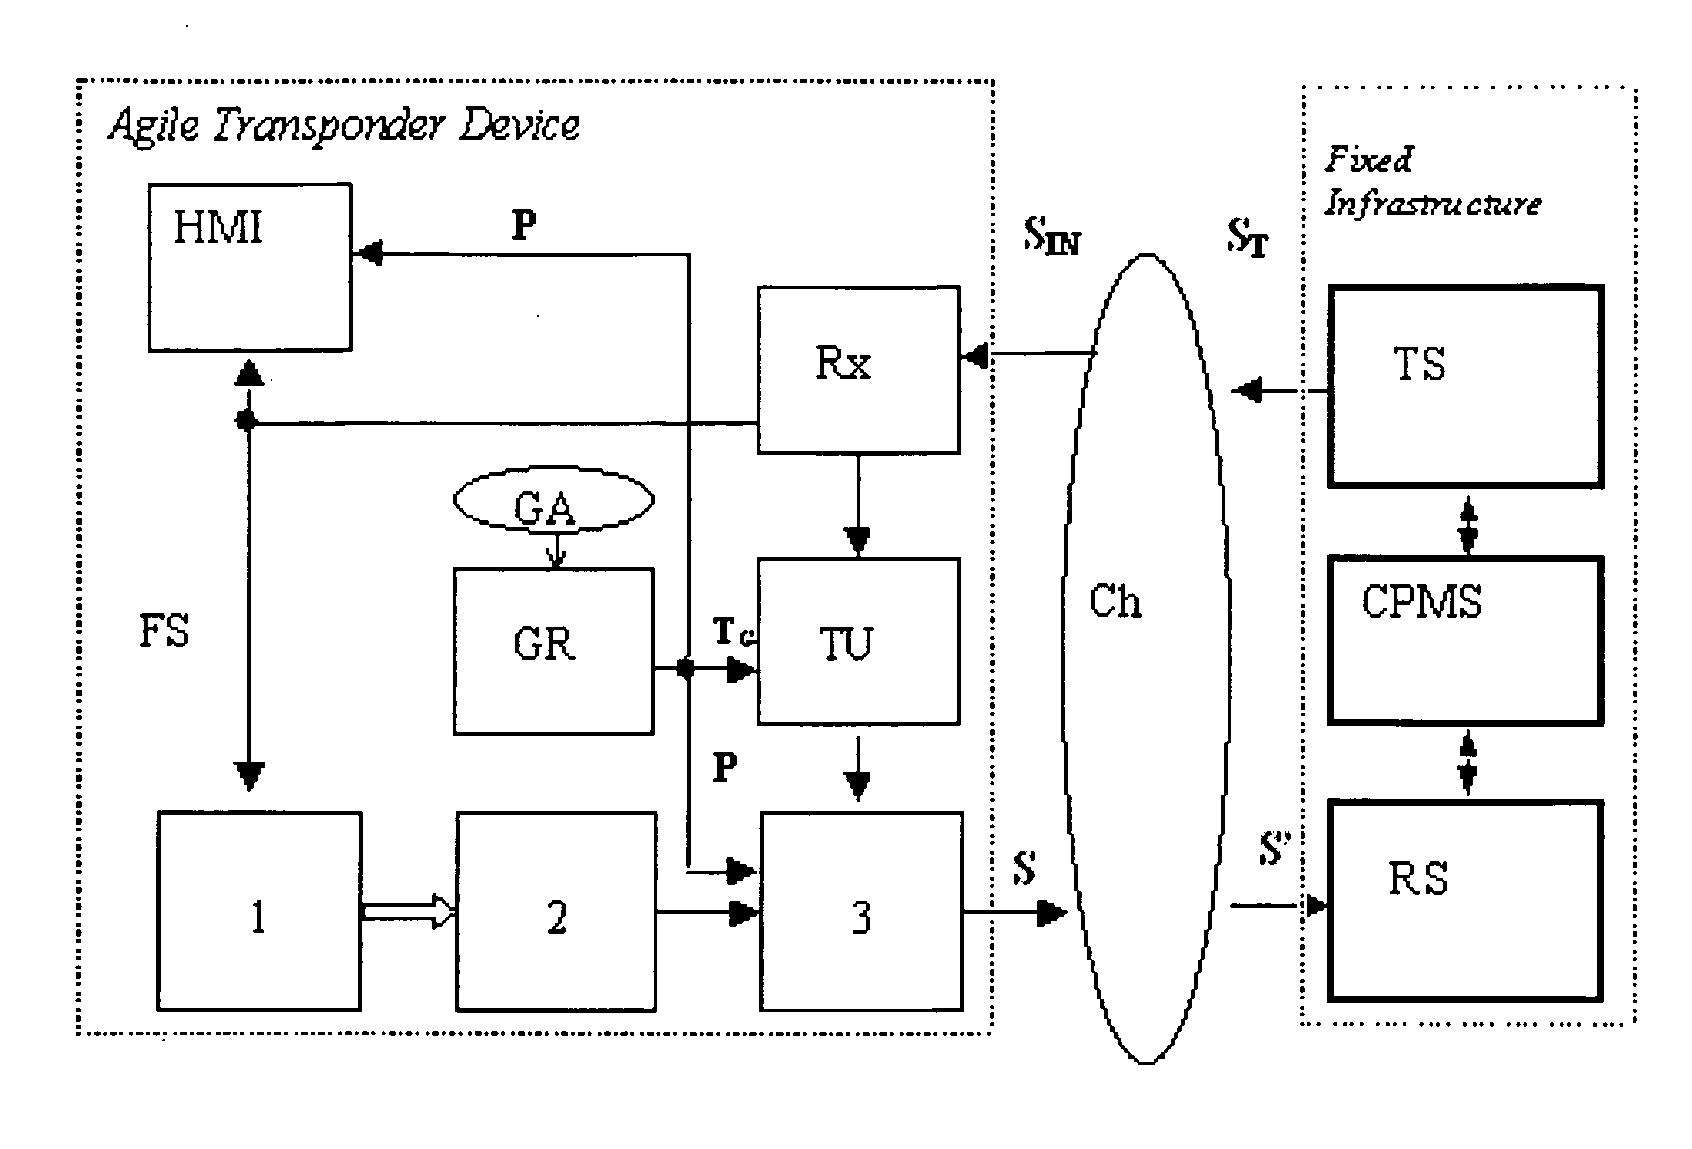 High-Capacity Location and Identification System for Cooperating Mobiles With Frequency Agile and Time Division Transponder Device on Board